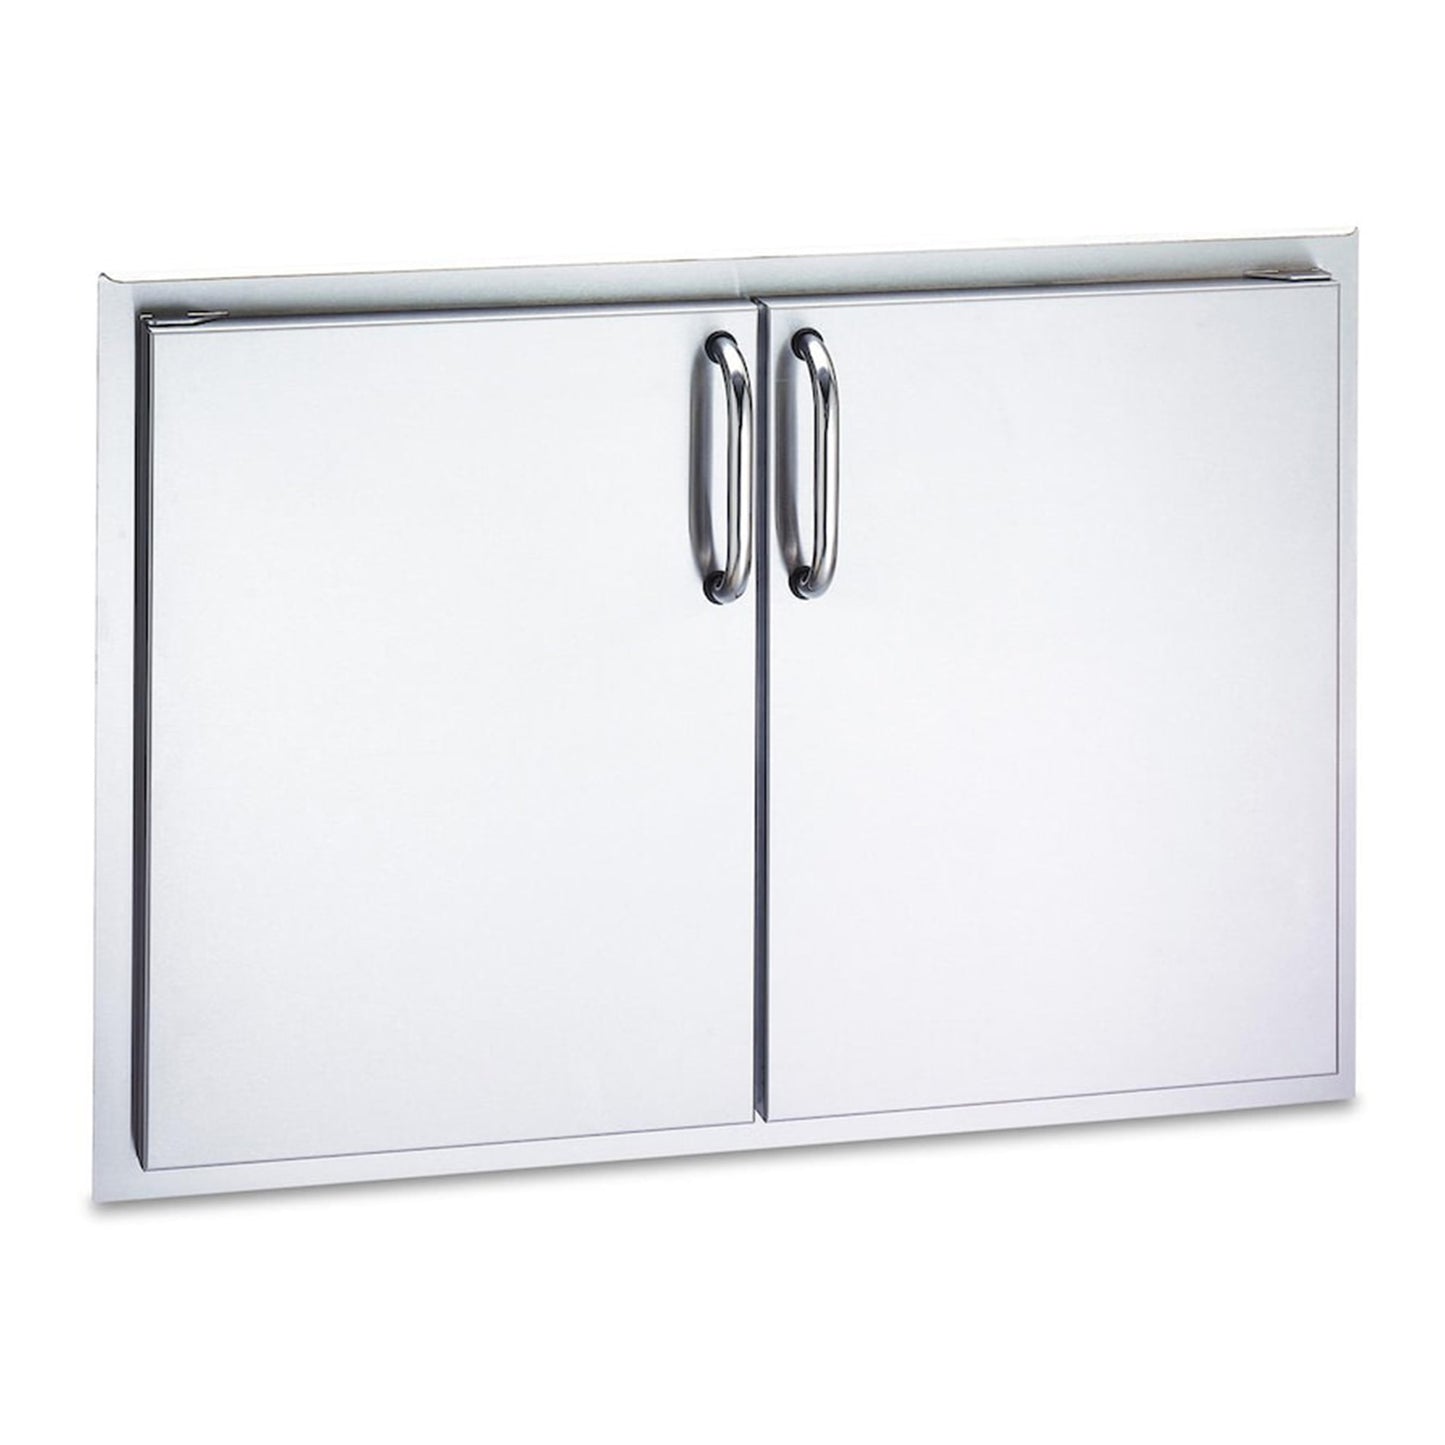 AOG Double Access Doors w/ Stainless Steel Handles